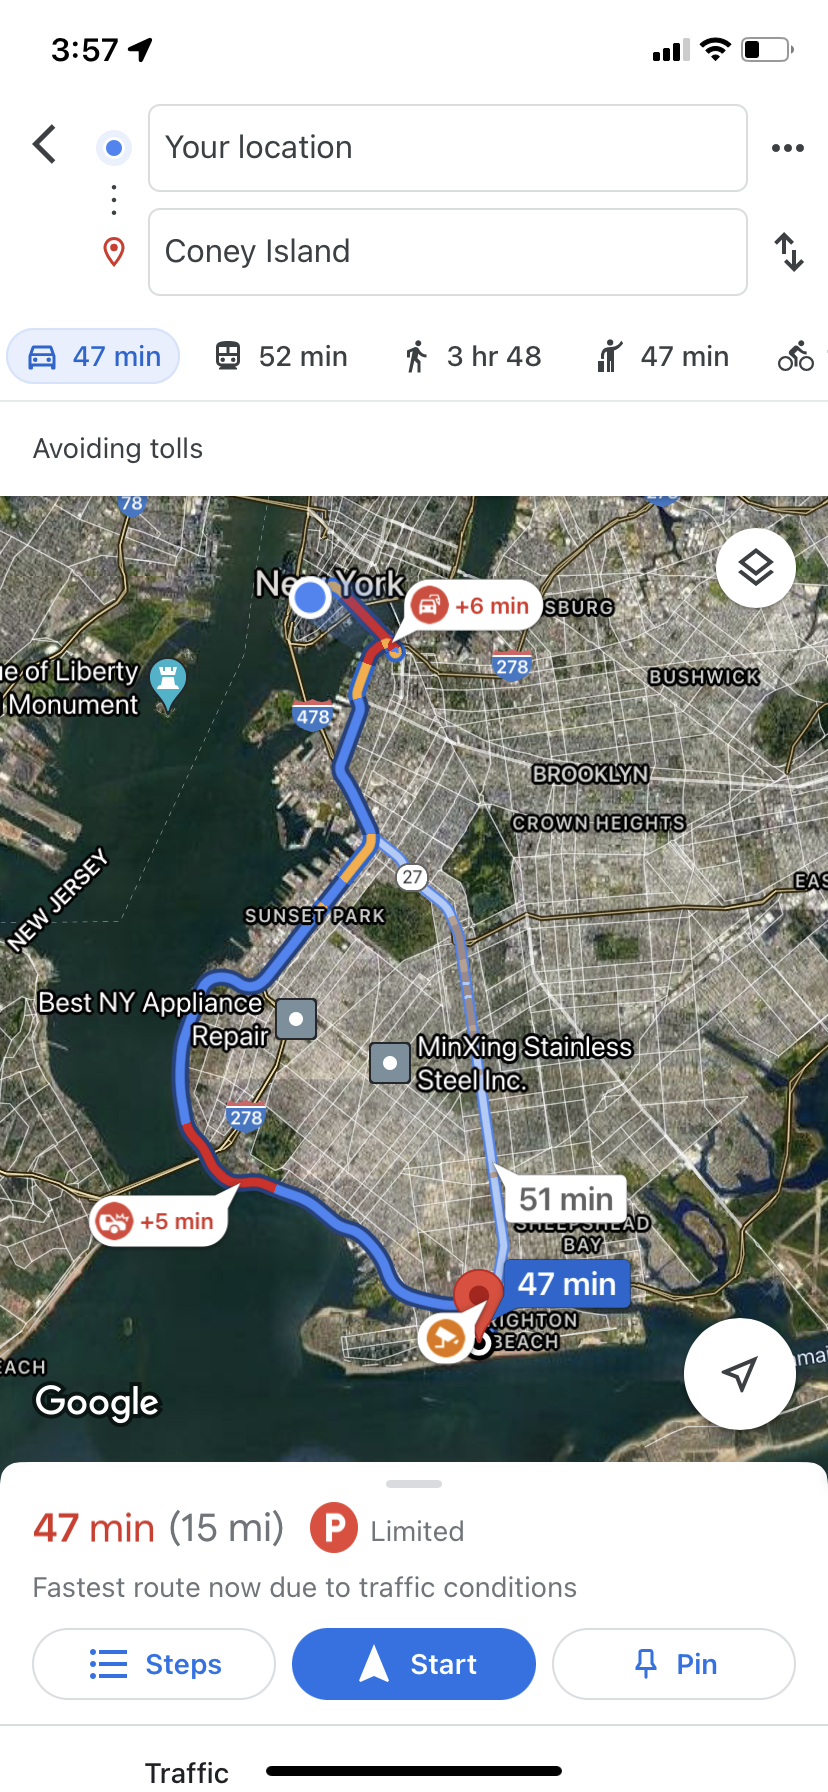 A screenshot from the Google Maps app, with a navigation course plotted out from Manhattan to Coney Island.